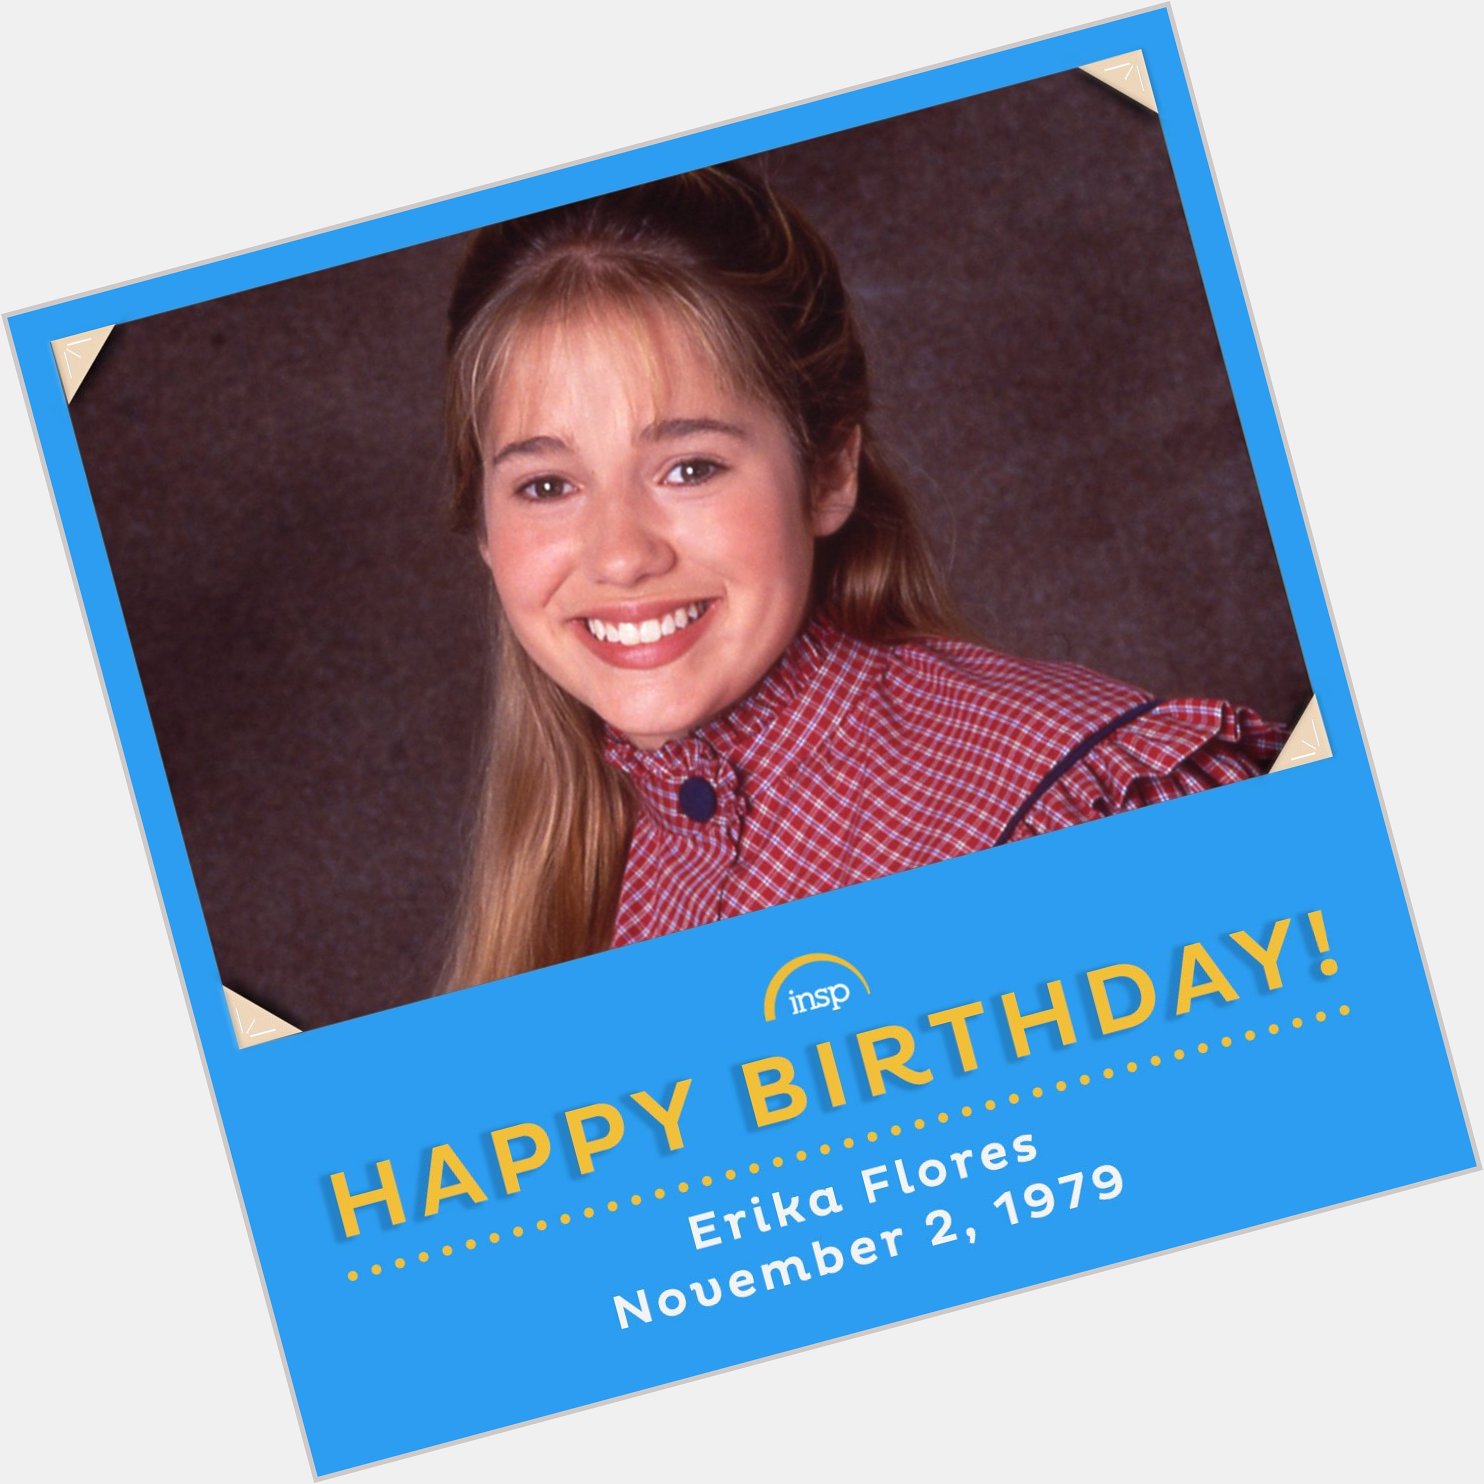 To wish Erika Flores of a happy birthday! Watch her as Colleen Cooper weeknights at 7 ET. 